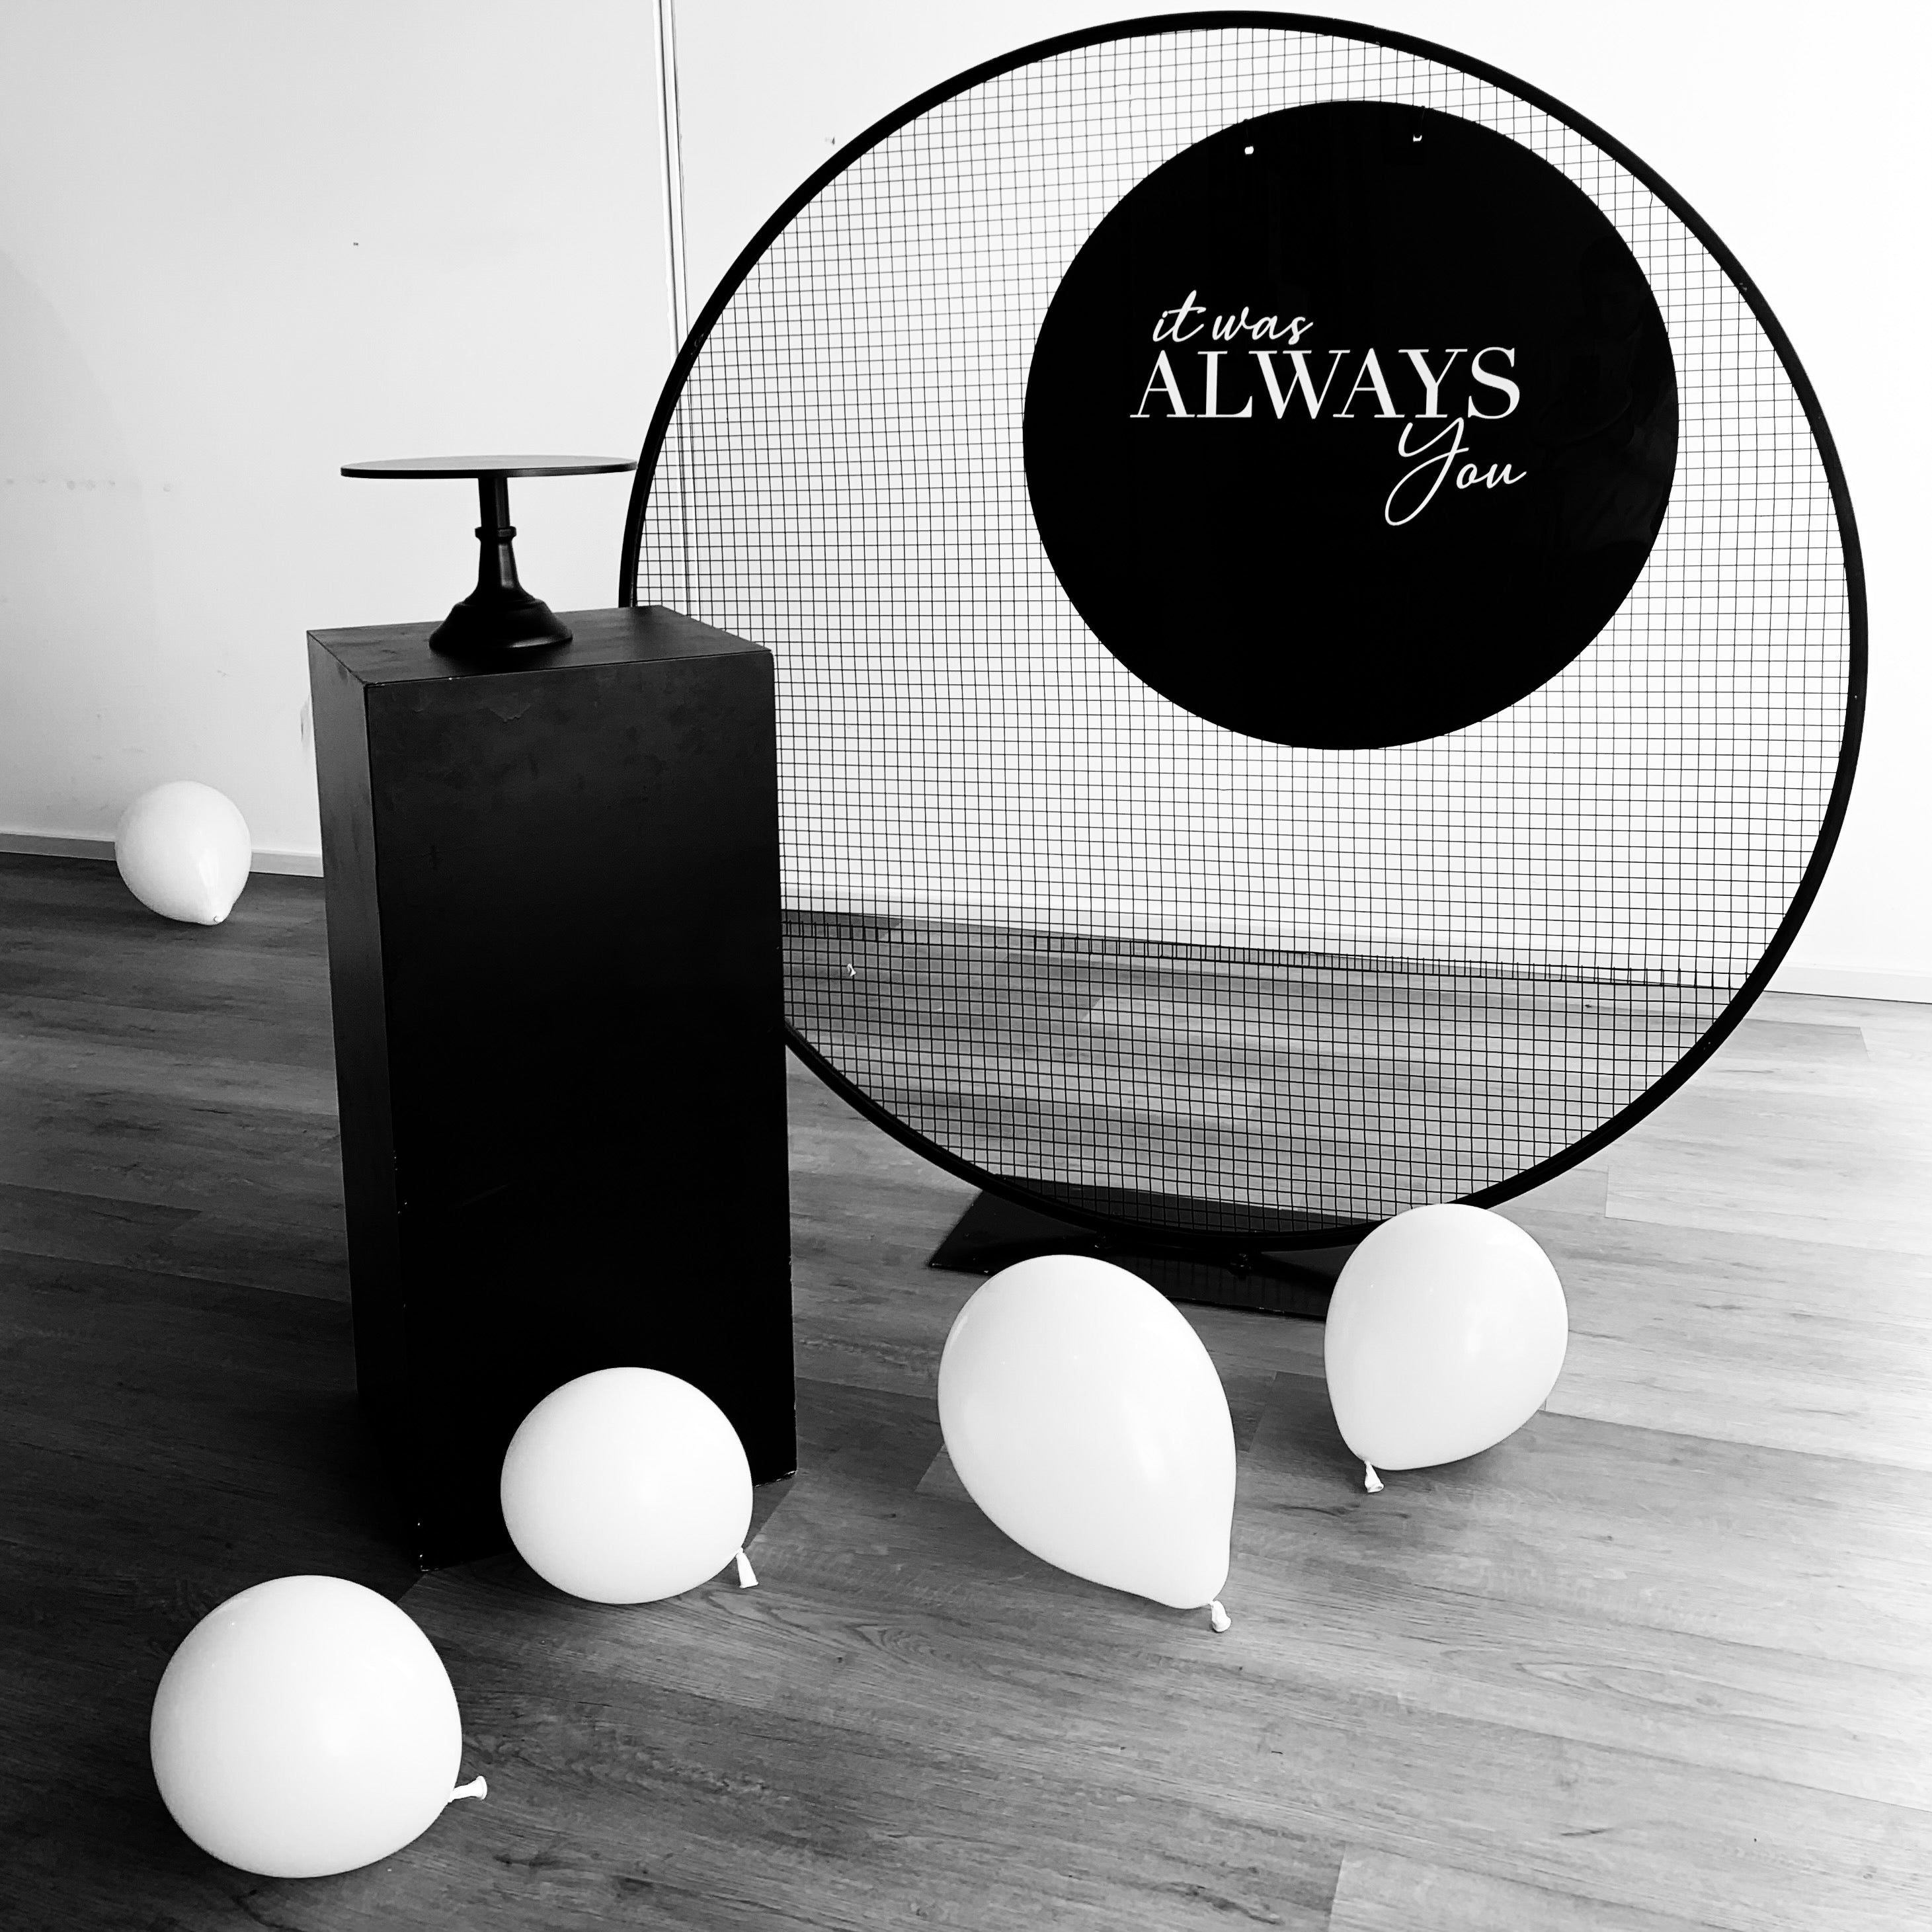 Black or White Halo Mesh Hire Package-Including Balloon Garland